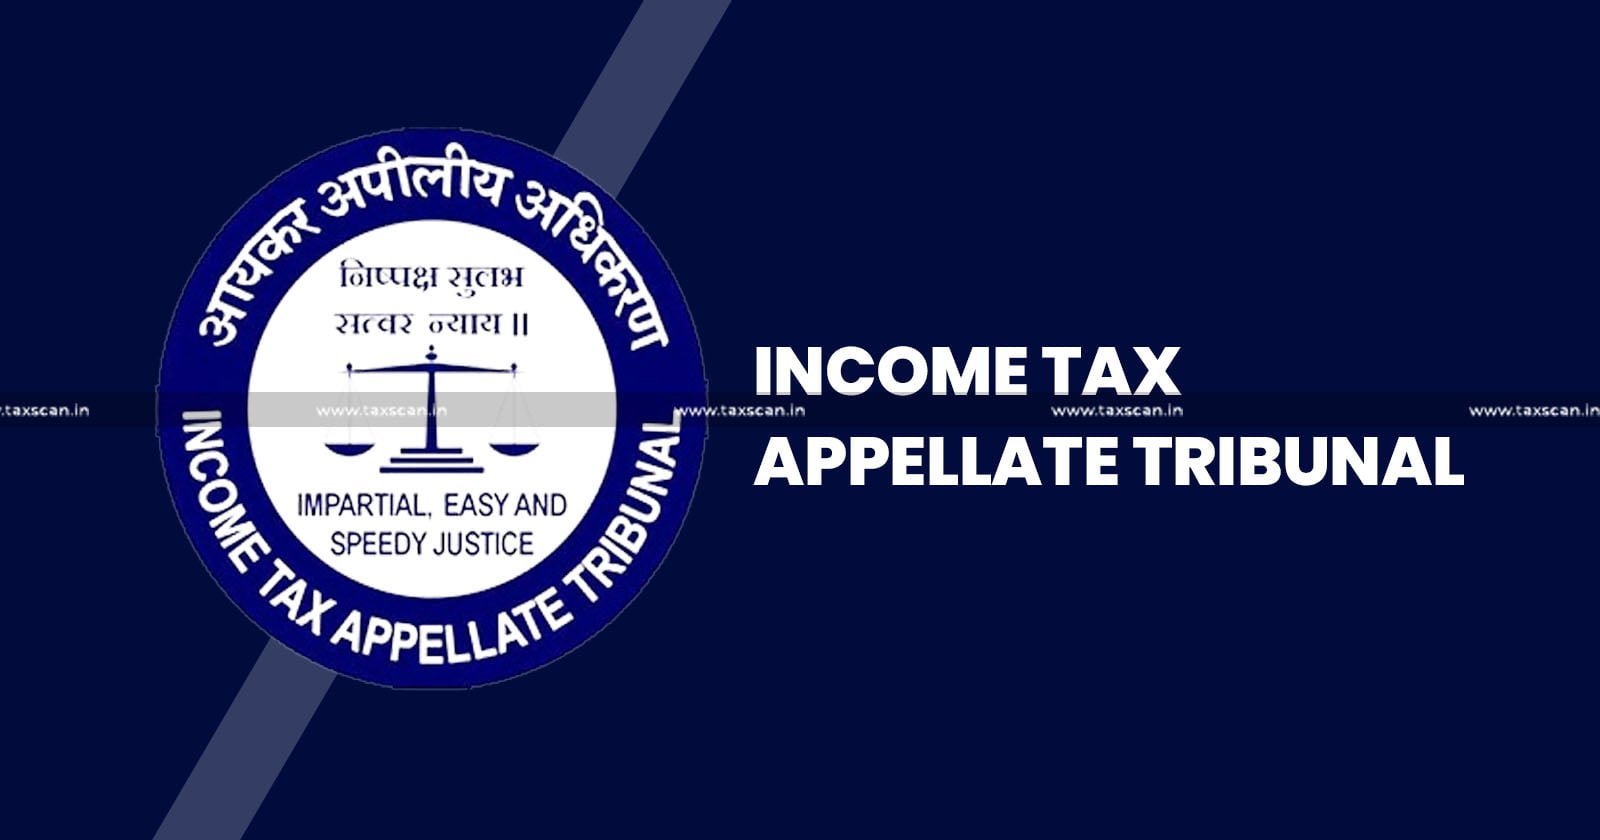 ITAT Mumbai - Member Lending Institutions - Collection of fees - Levy fees for guarantee - Taxation on guarantee fees - Income Tax - taxscan